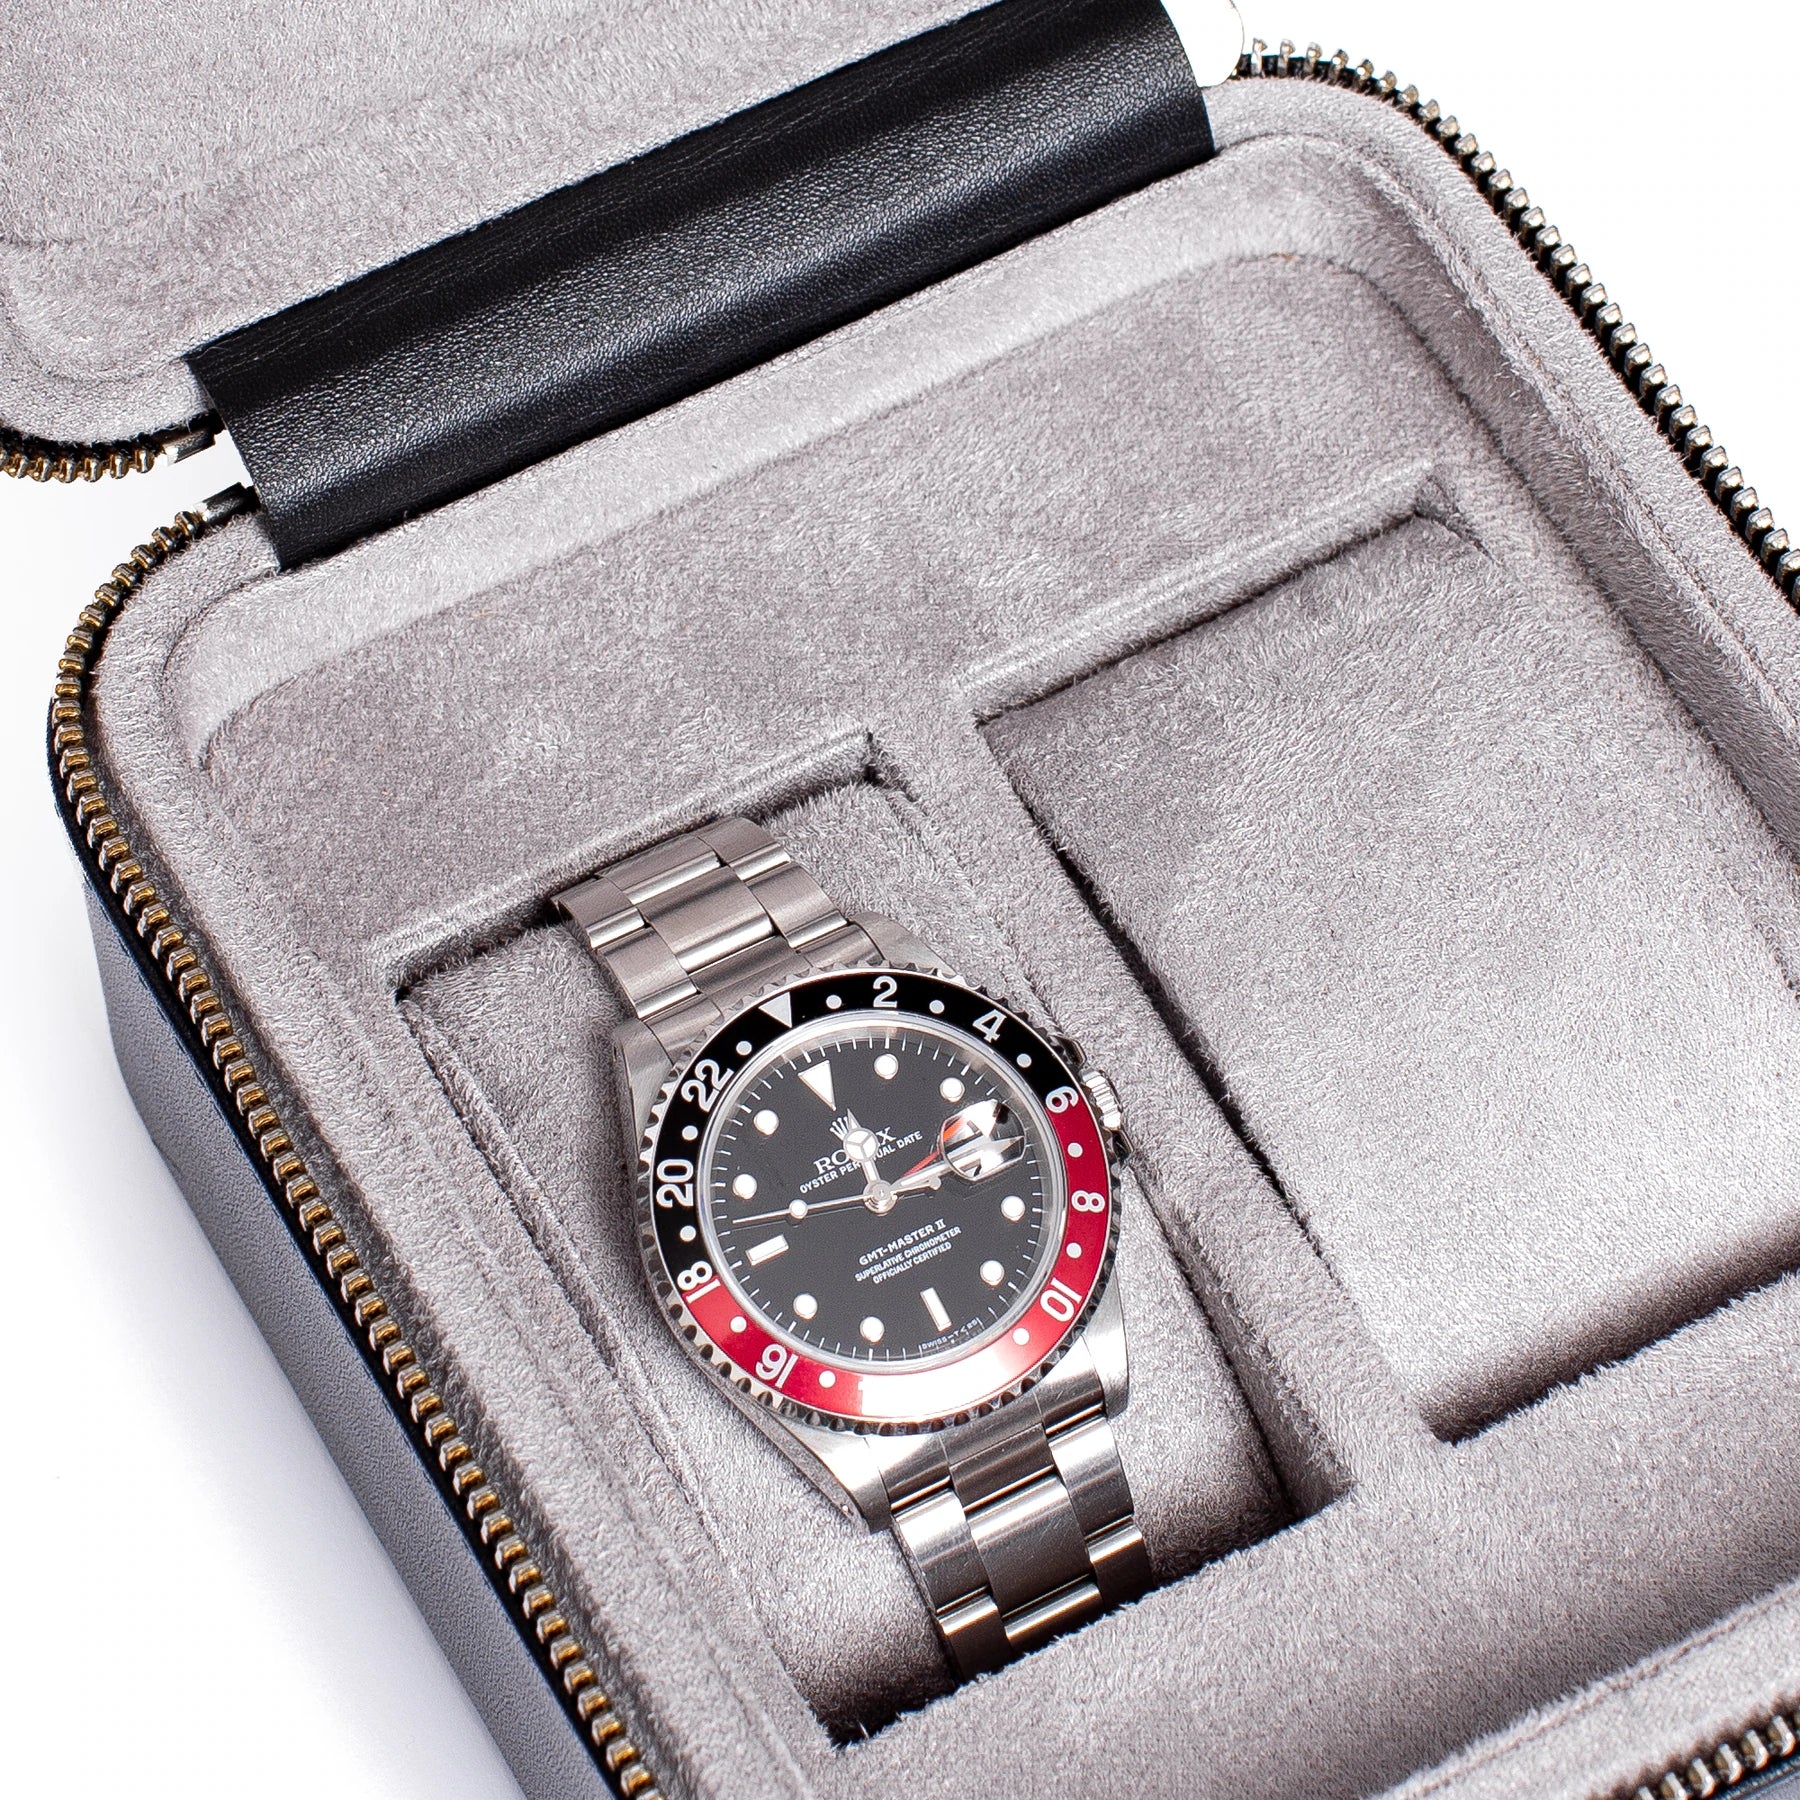 Rapport - Hyde Park Double Watch Case in Black Leather | D261